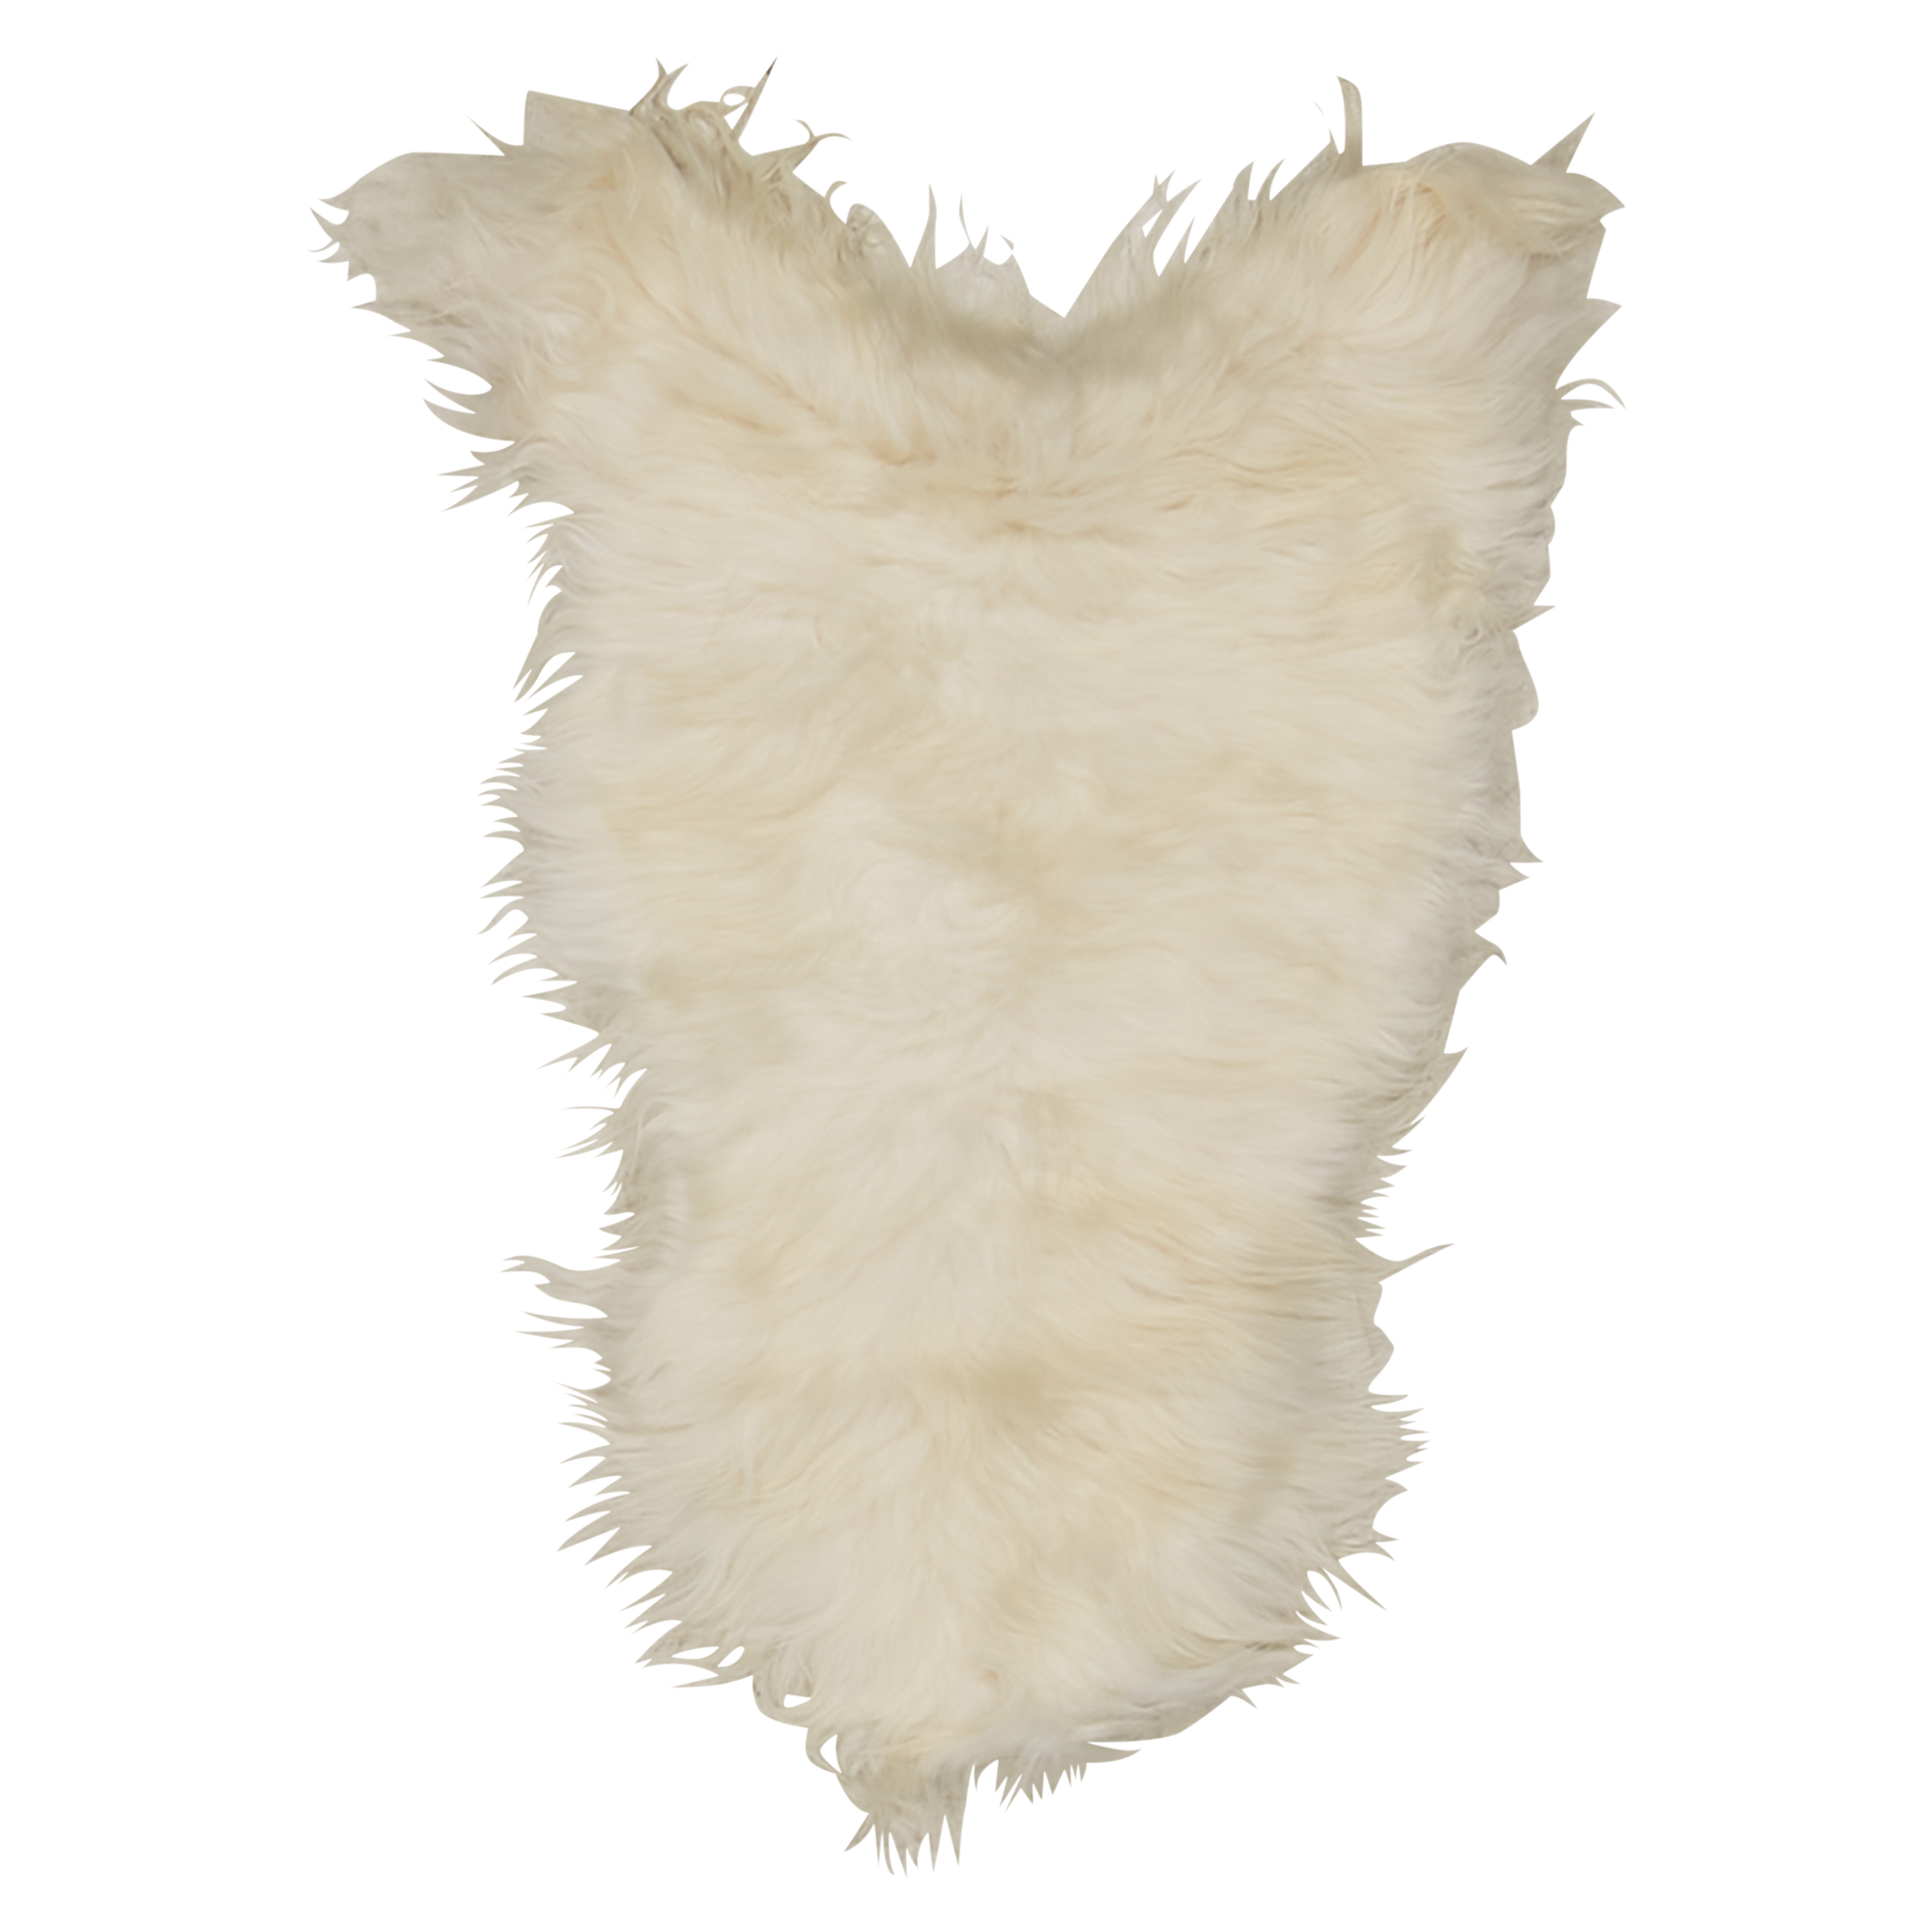 Adding a touch of natural and luxurious design, each English Sheepskin rug has its only unique shade of white.